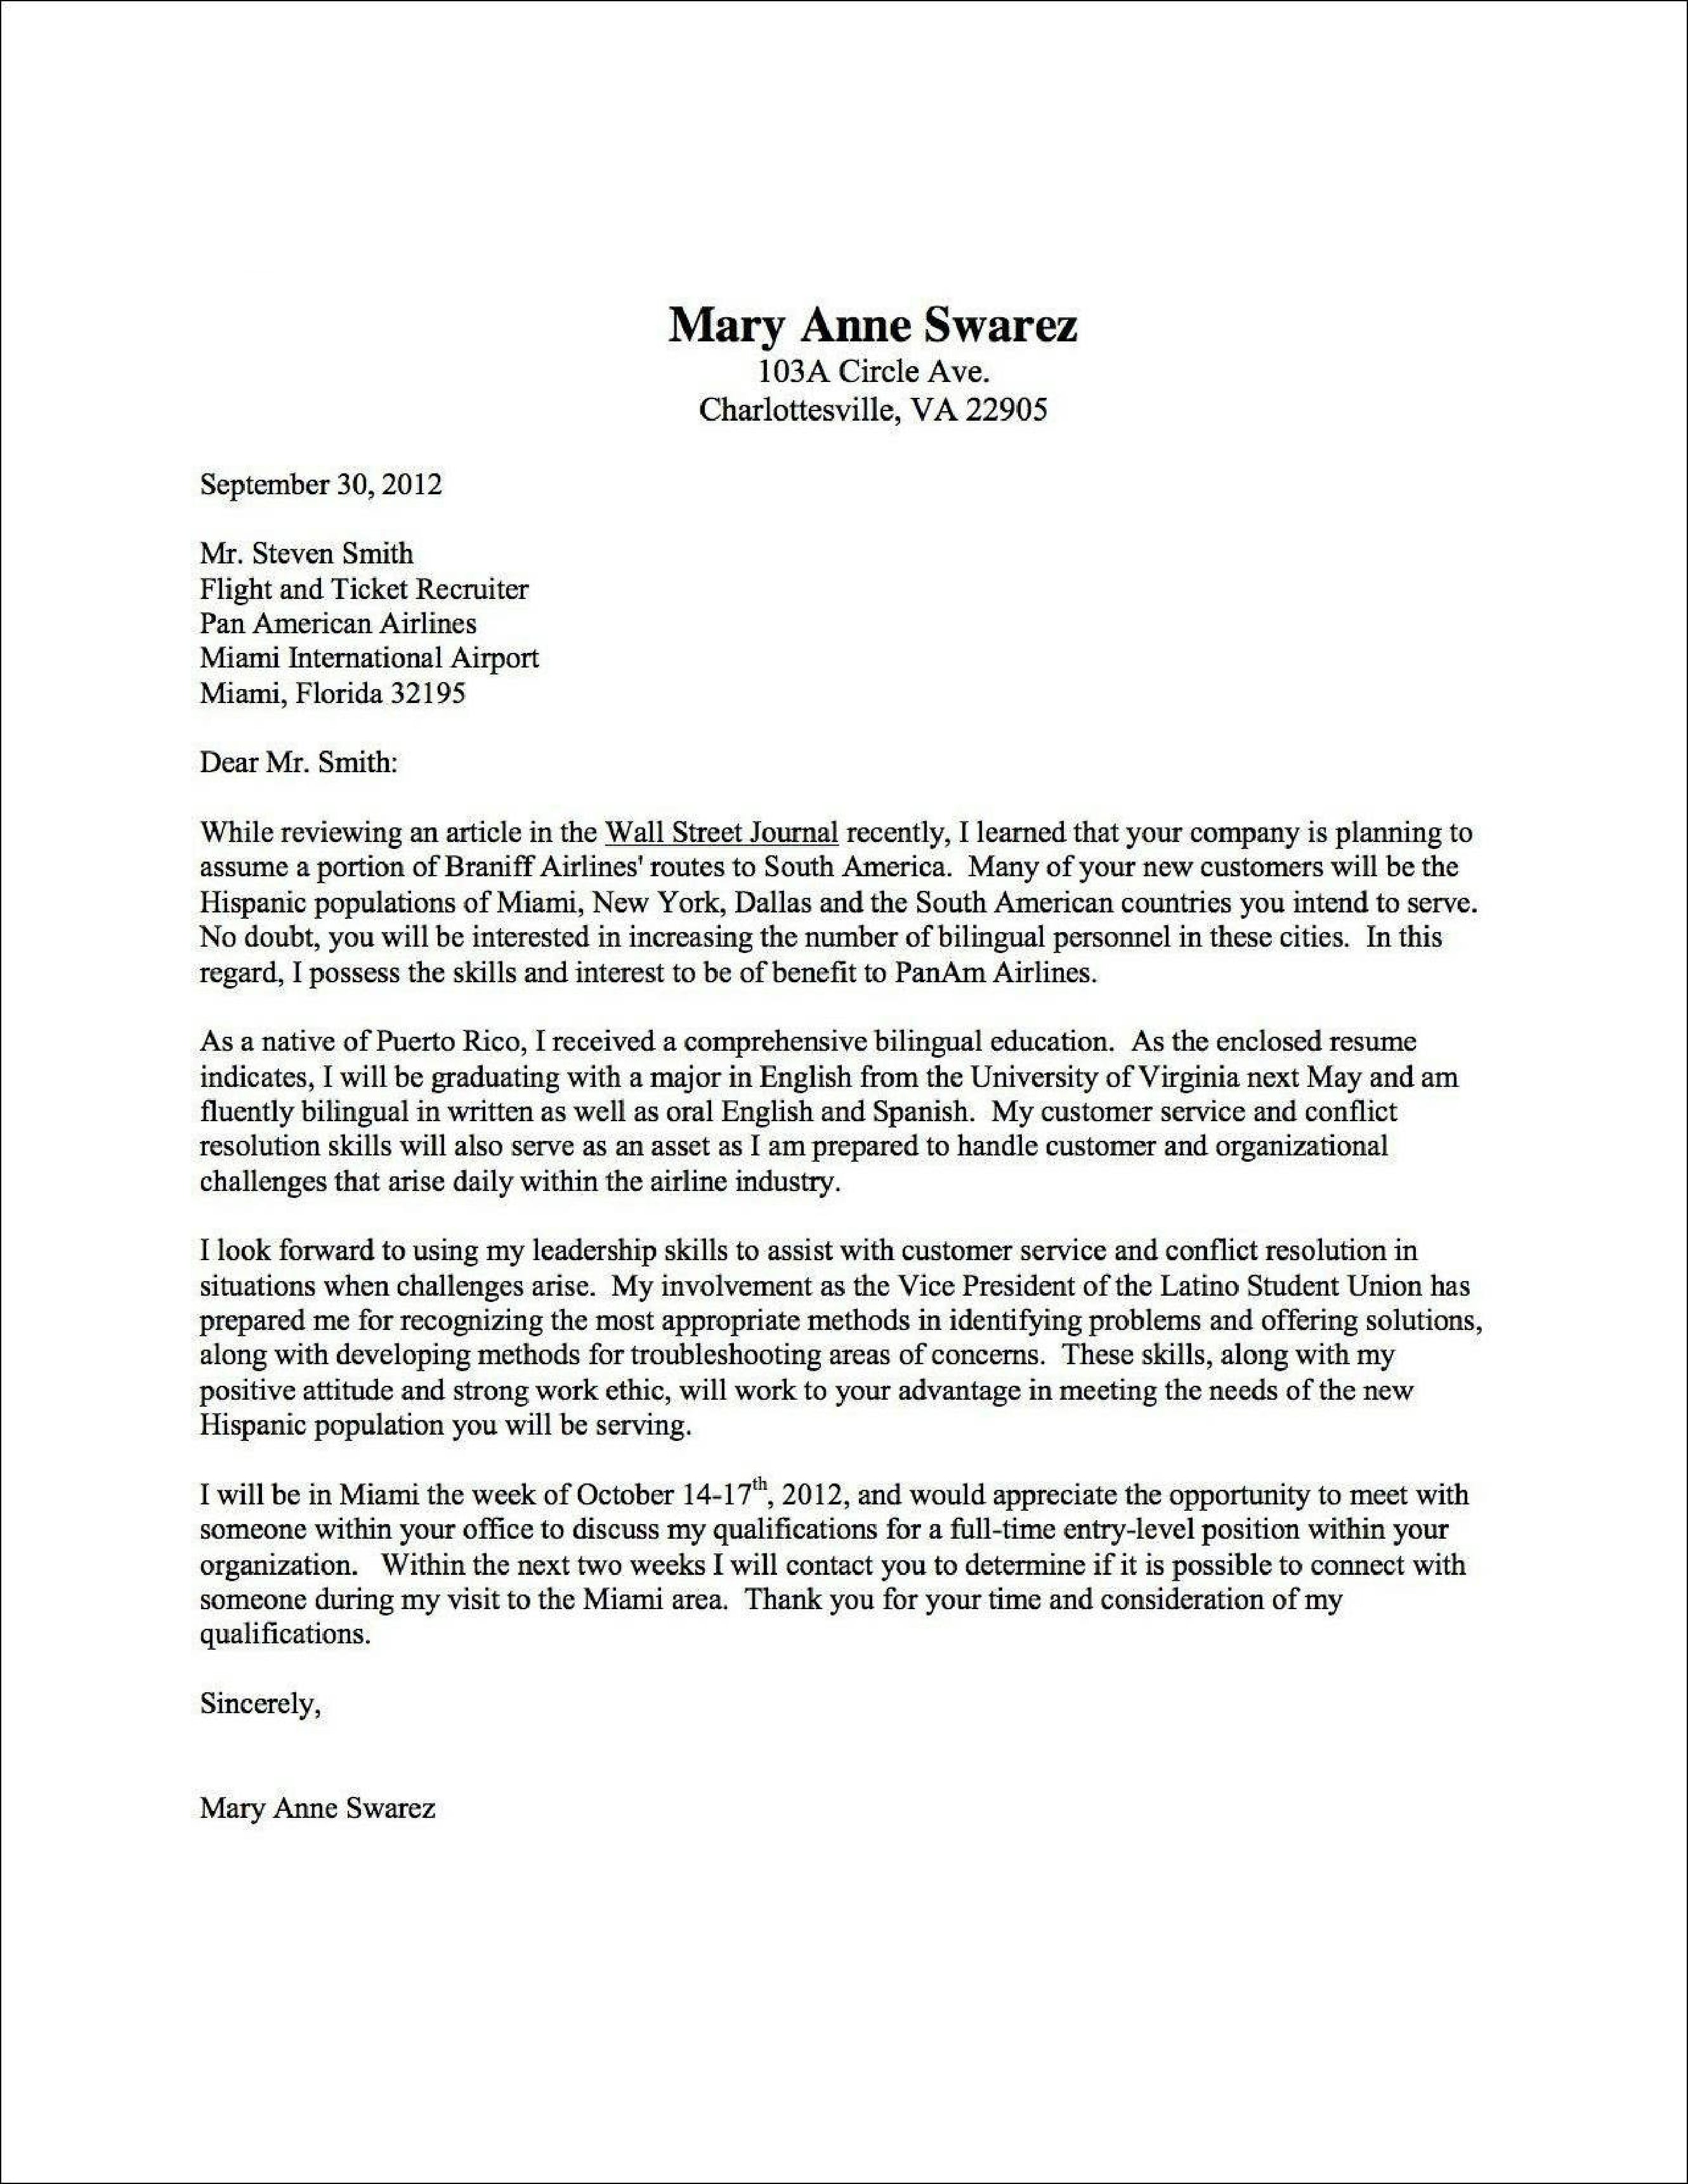 Actual format of MIT cover letter : r/MBA